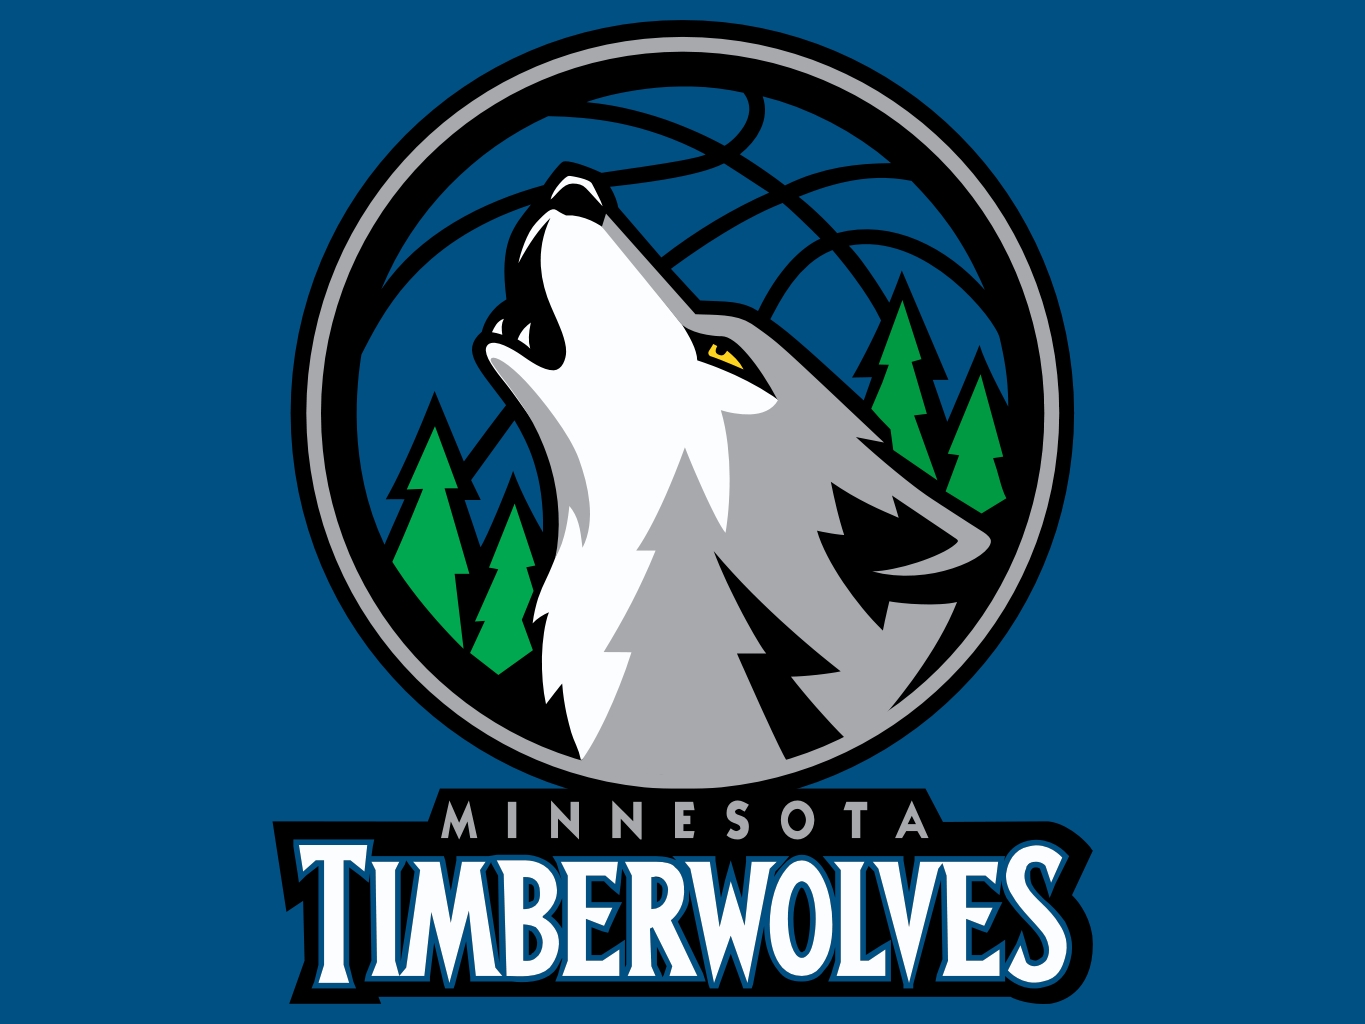 Everything NBA Inc: Watch Out for the Minnesota Timberwolves